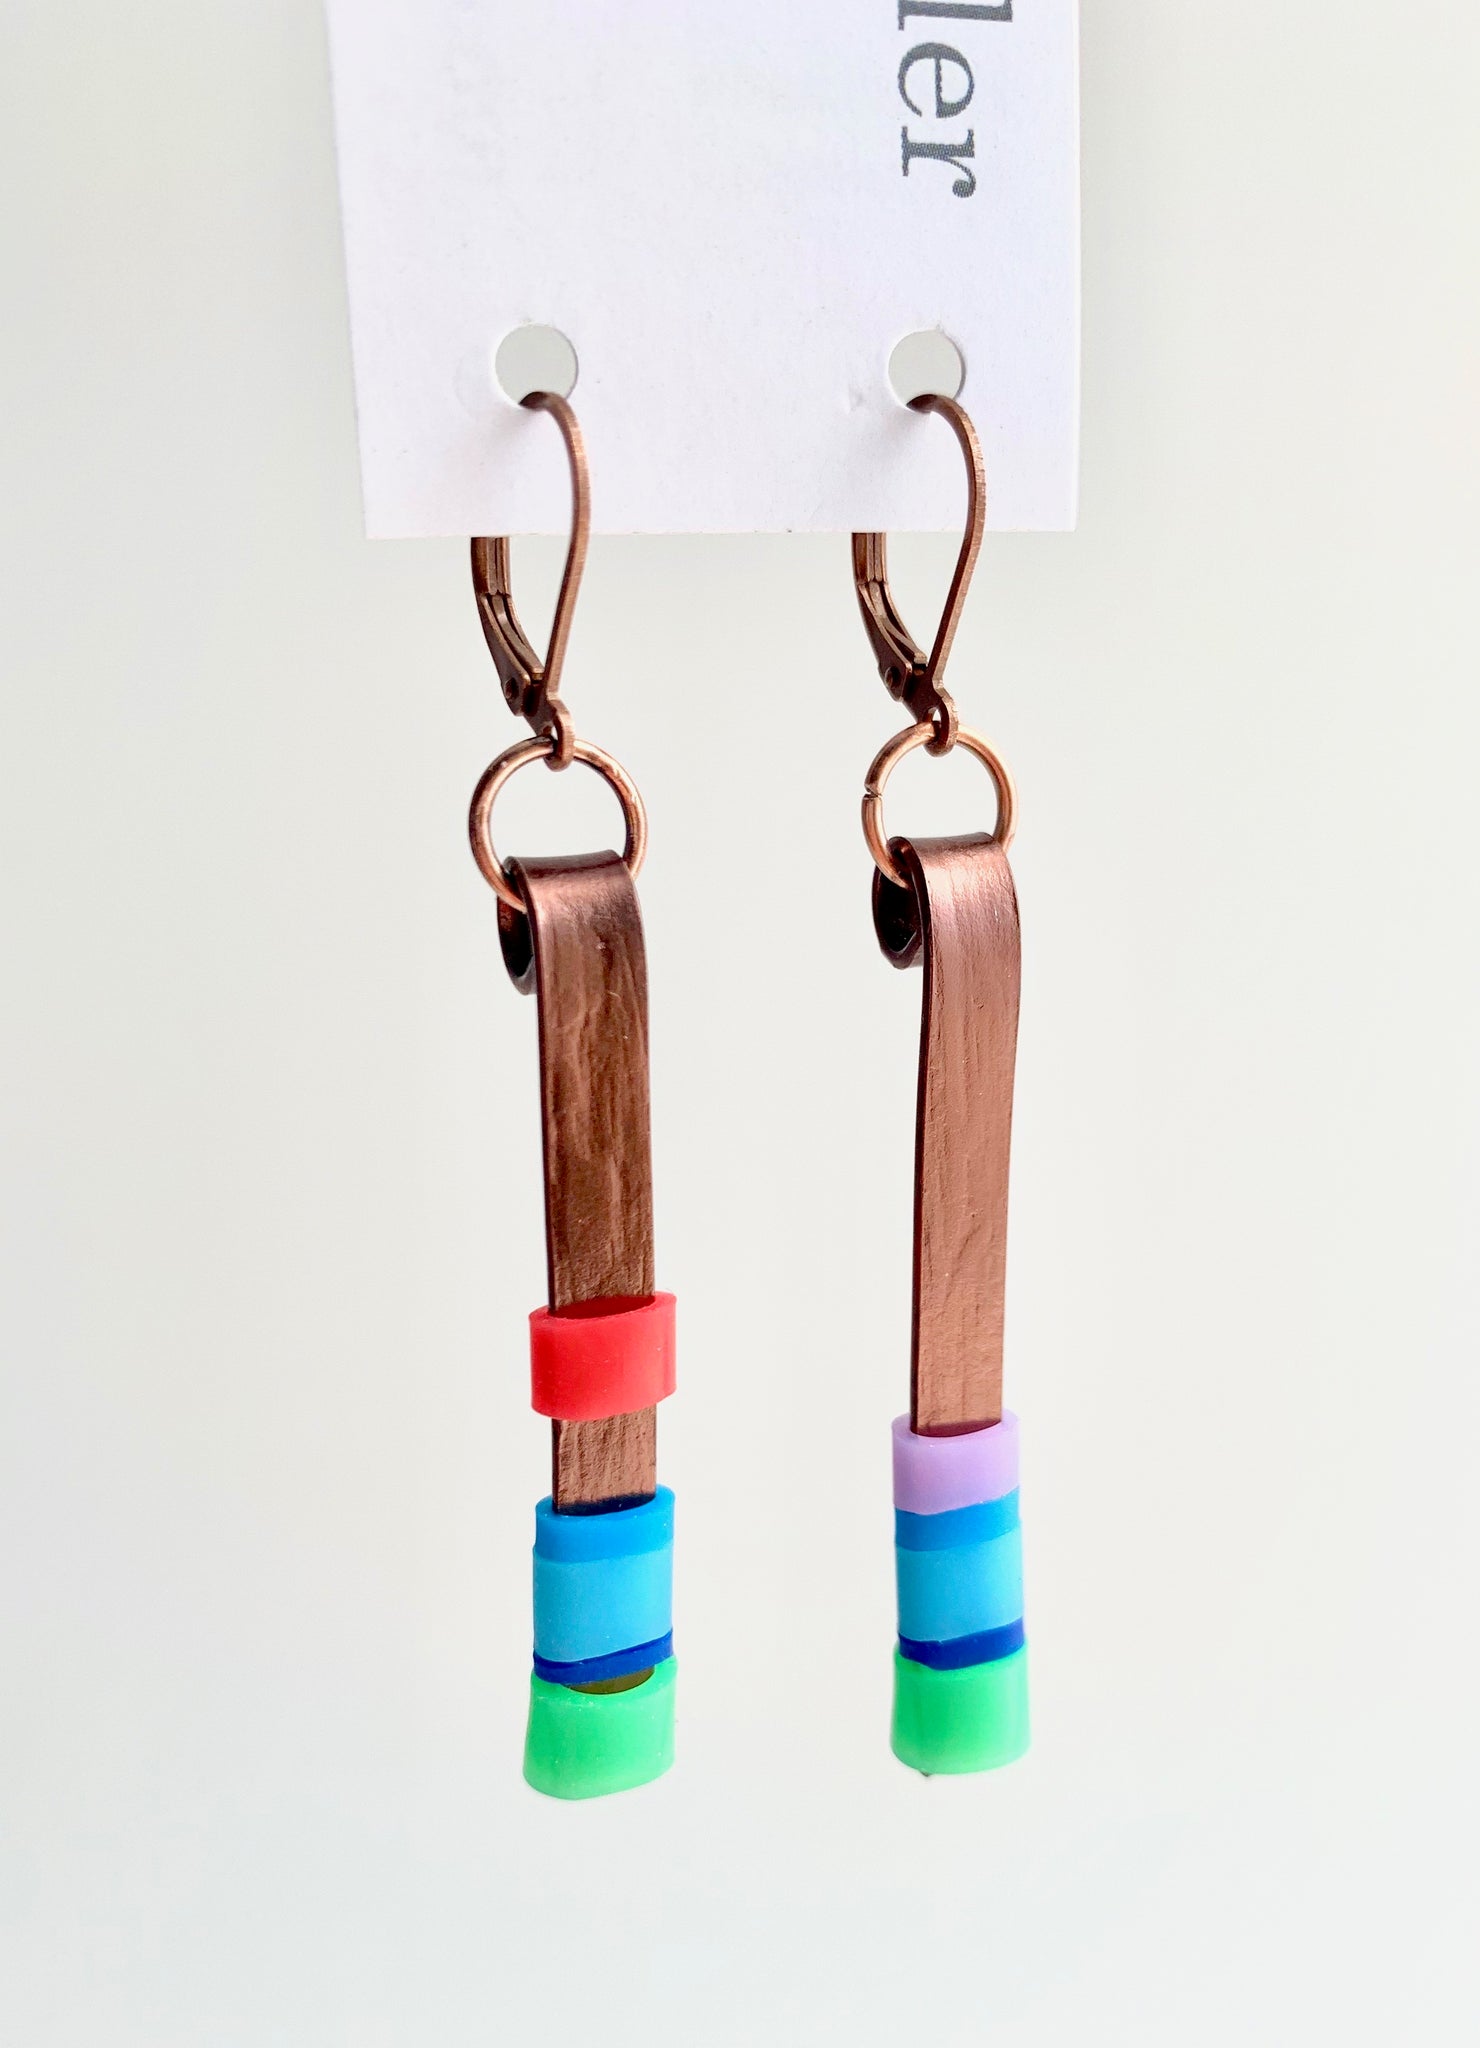 Matchstick earrings in bronze coloured aluminum wire with green, mix of blues, red and lavender coloured silicone tubing. These hang 4.5cm in length.